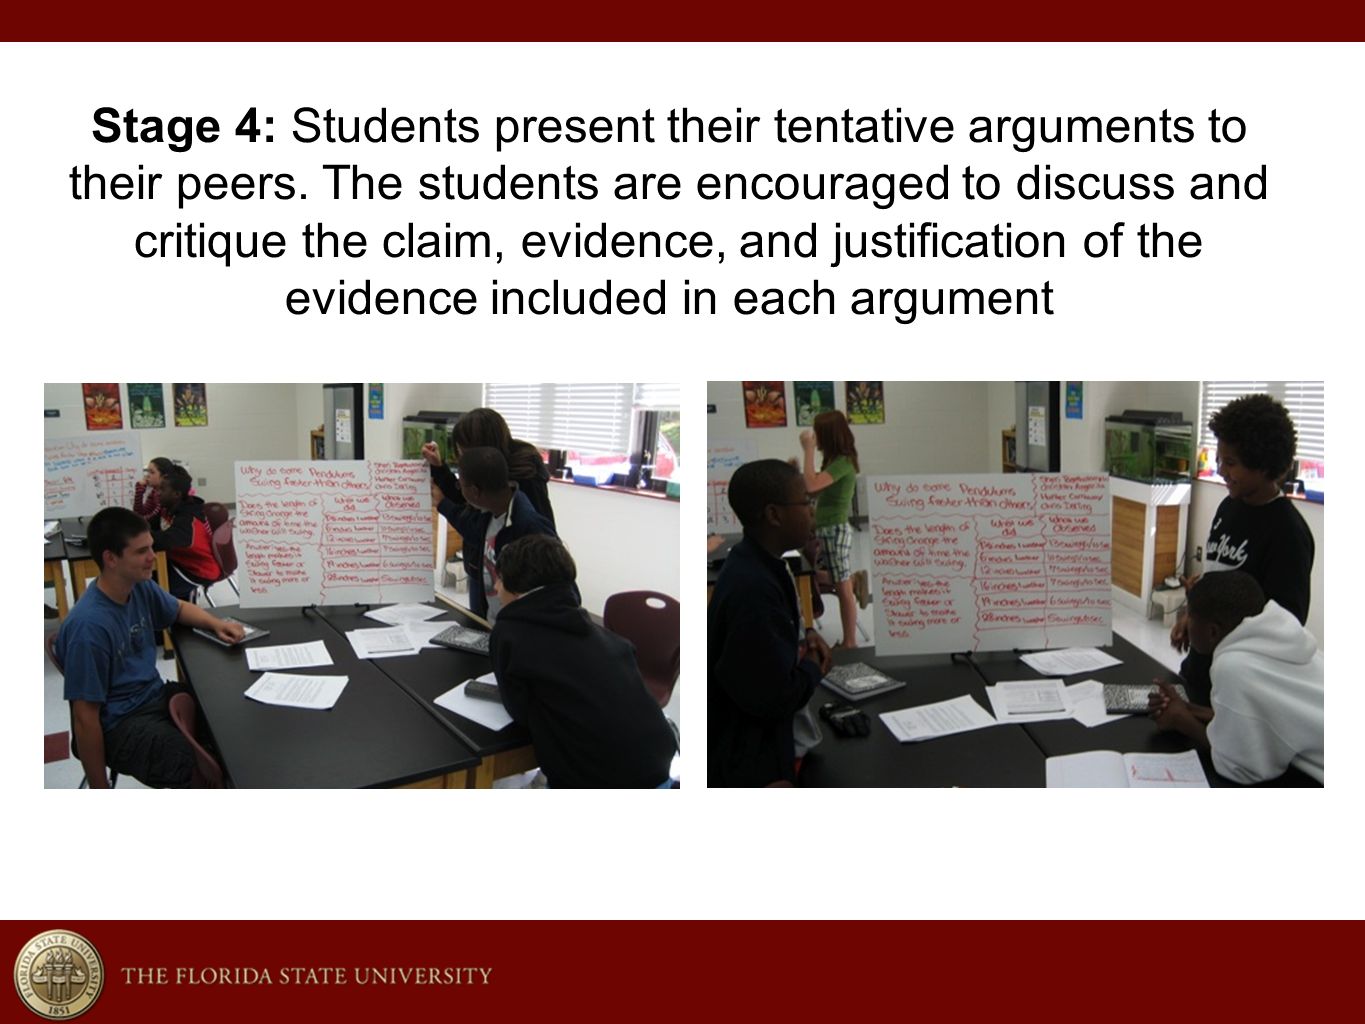 Stage 4: Students present their tentative arguments to their peers.